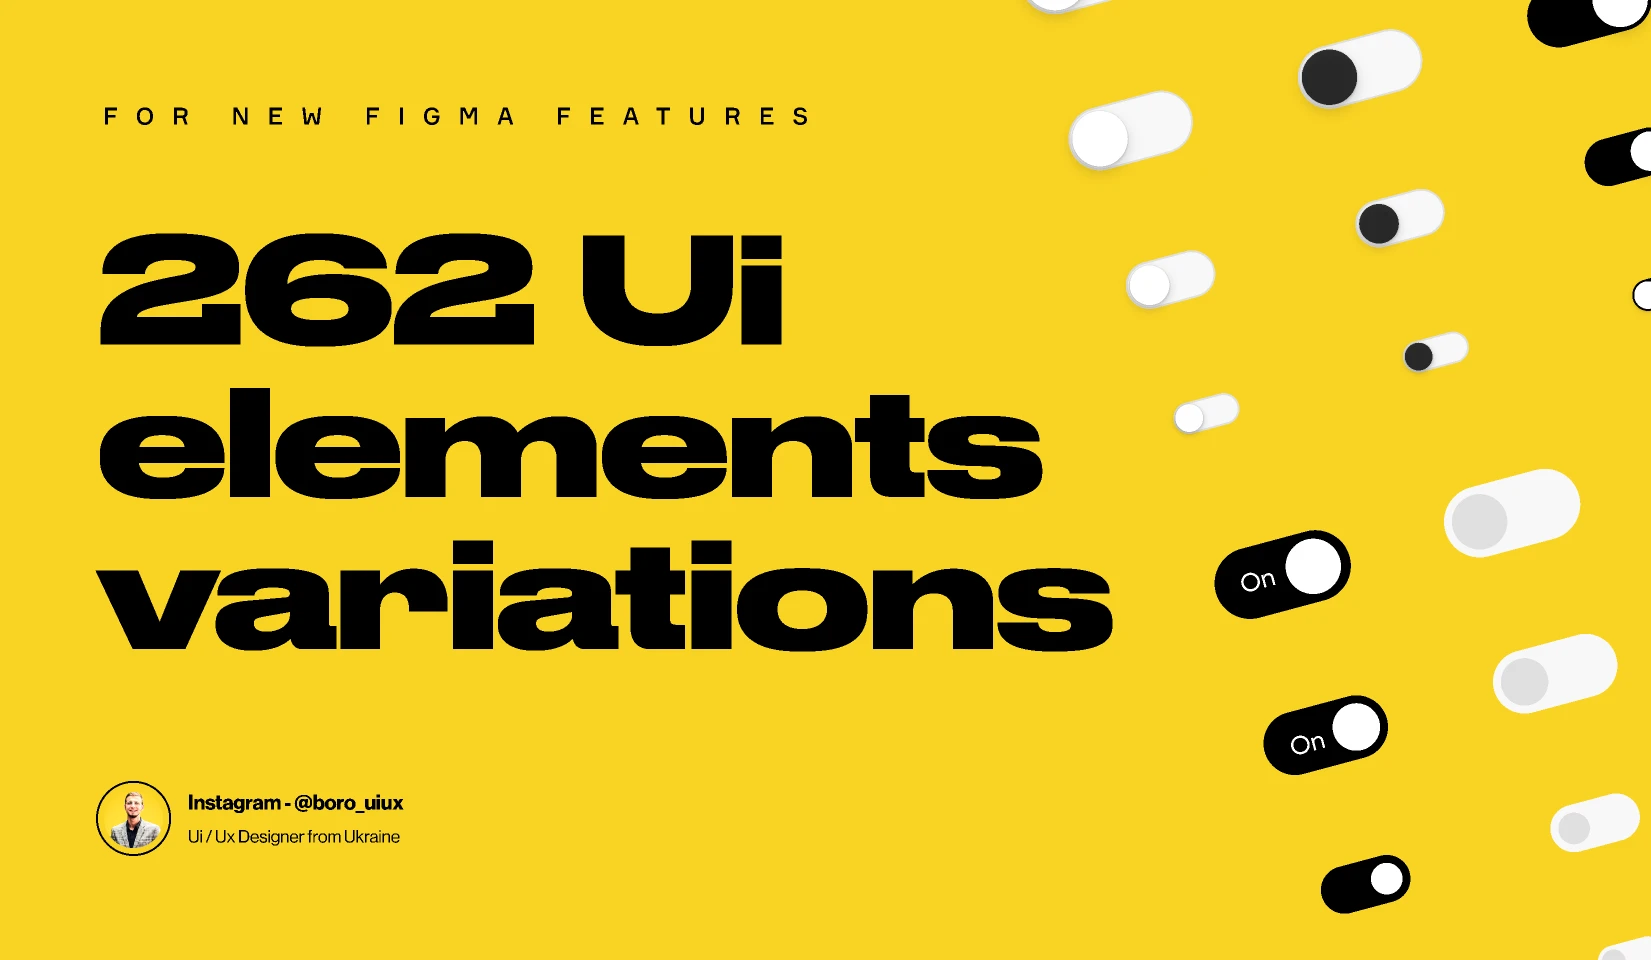 262 Ui elements variations for Figma for Figma and Adobe XD